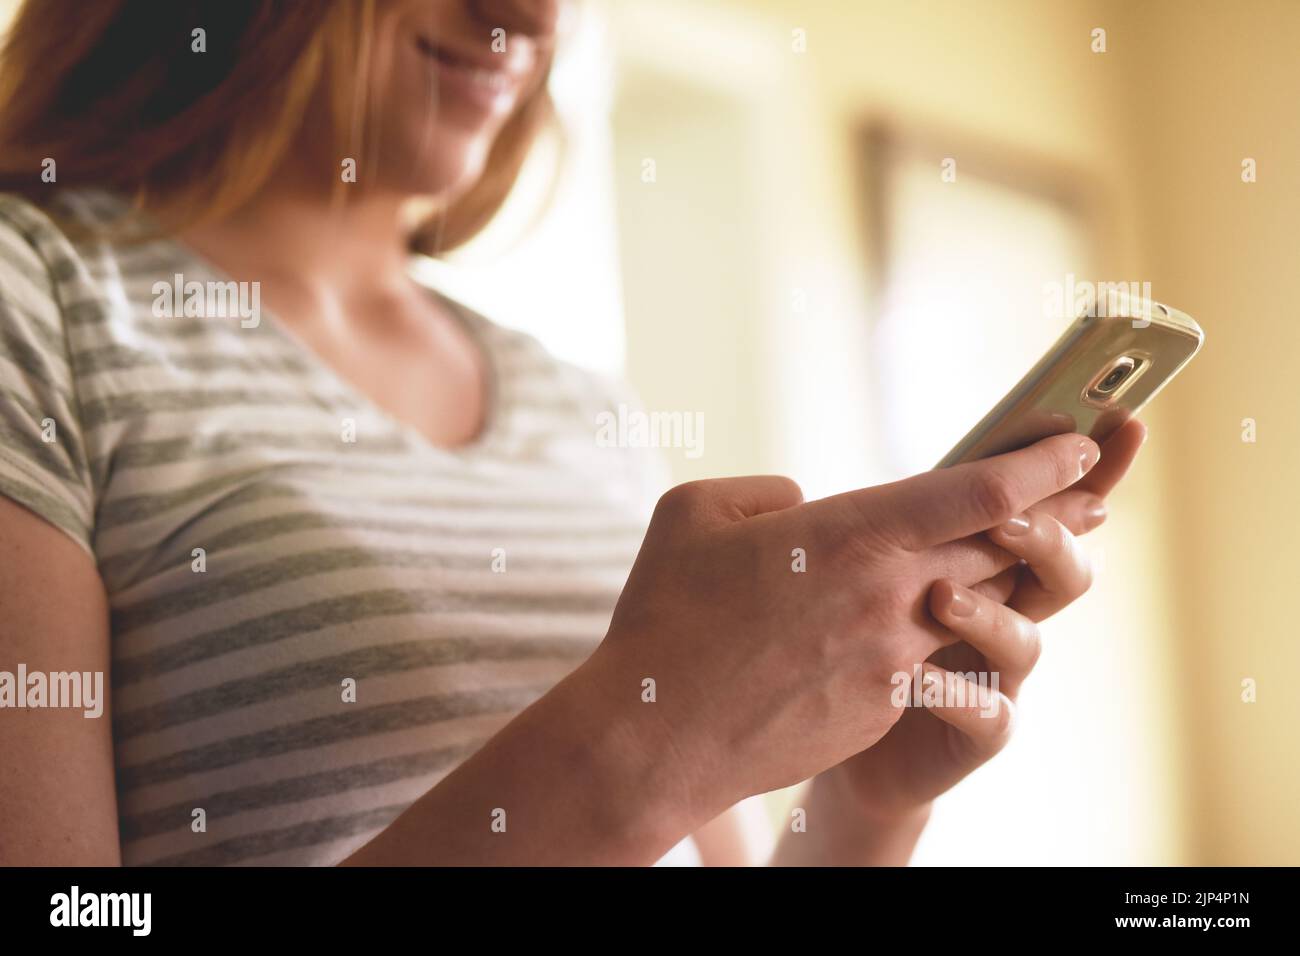 Catching up on some early morning texts. an unrecognizable woman using a cellphone in the morning at home. Stock Photo